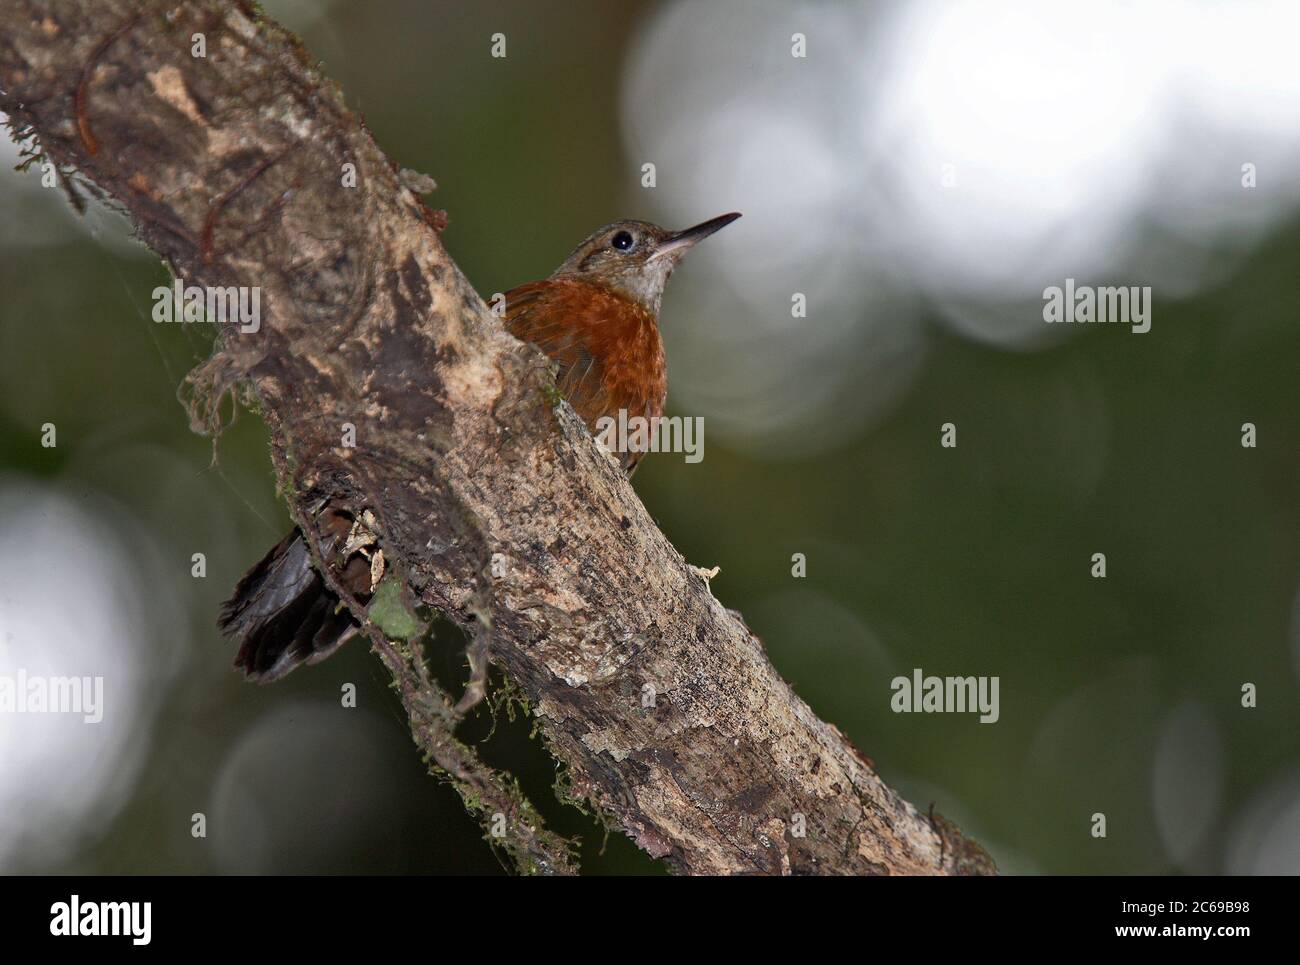 Rufous-breasted Leaftosser (Sclerurus scansor cearensis) sitting on a branch in lowland atlantic rainforest of Brazil Stock Photo